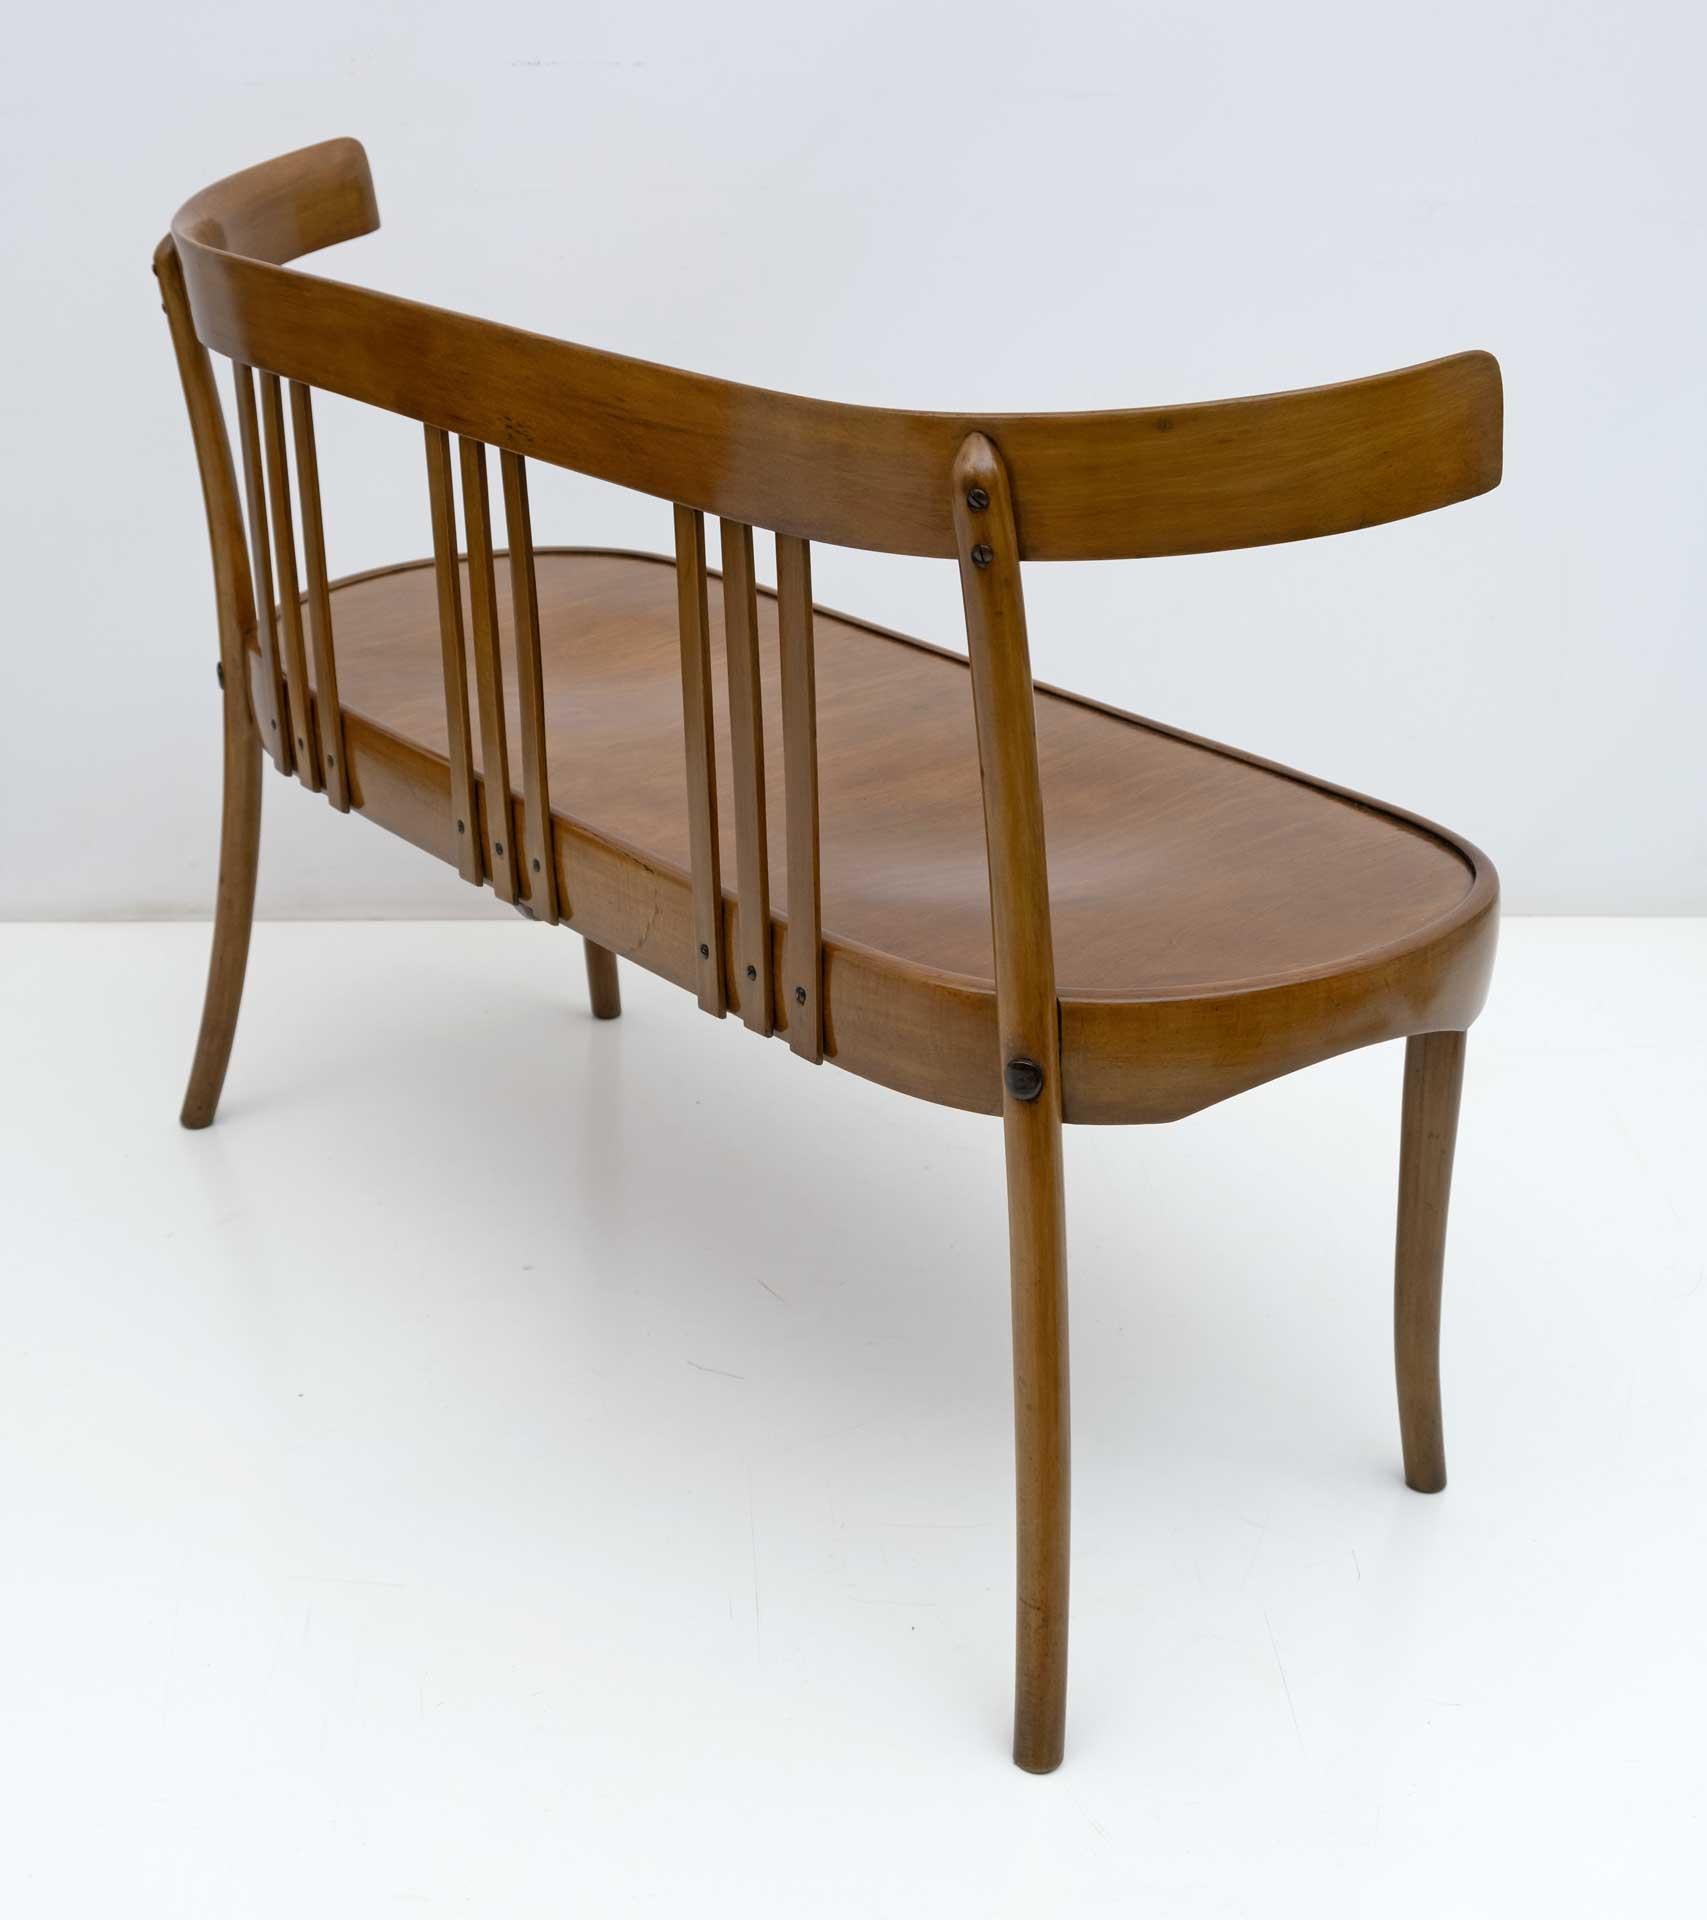 This bench was produced by the Volpe company, leader in Italy in the bent beech technique, a technique invented by Thonet. The Volpe company was born in Italy in Friuli in 1894.
The bench has been cleaned and polished with shellac, maintaining the